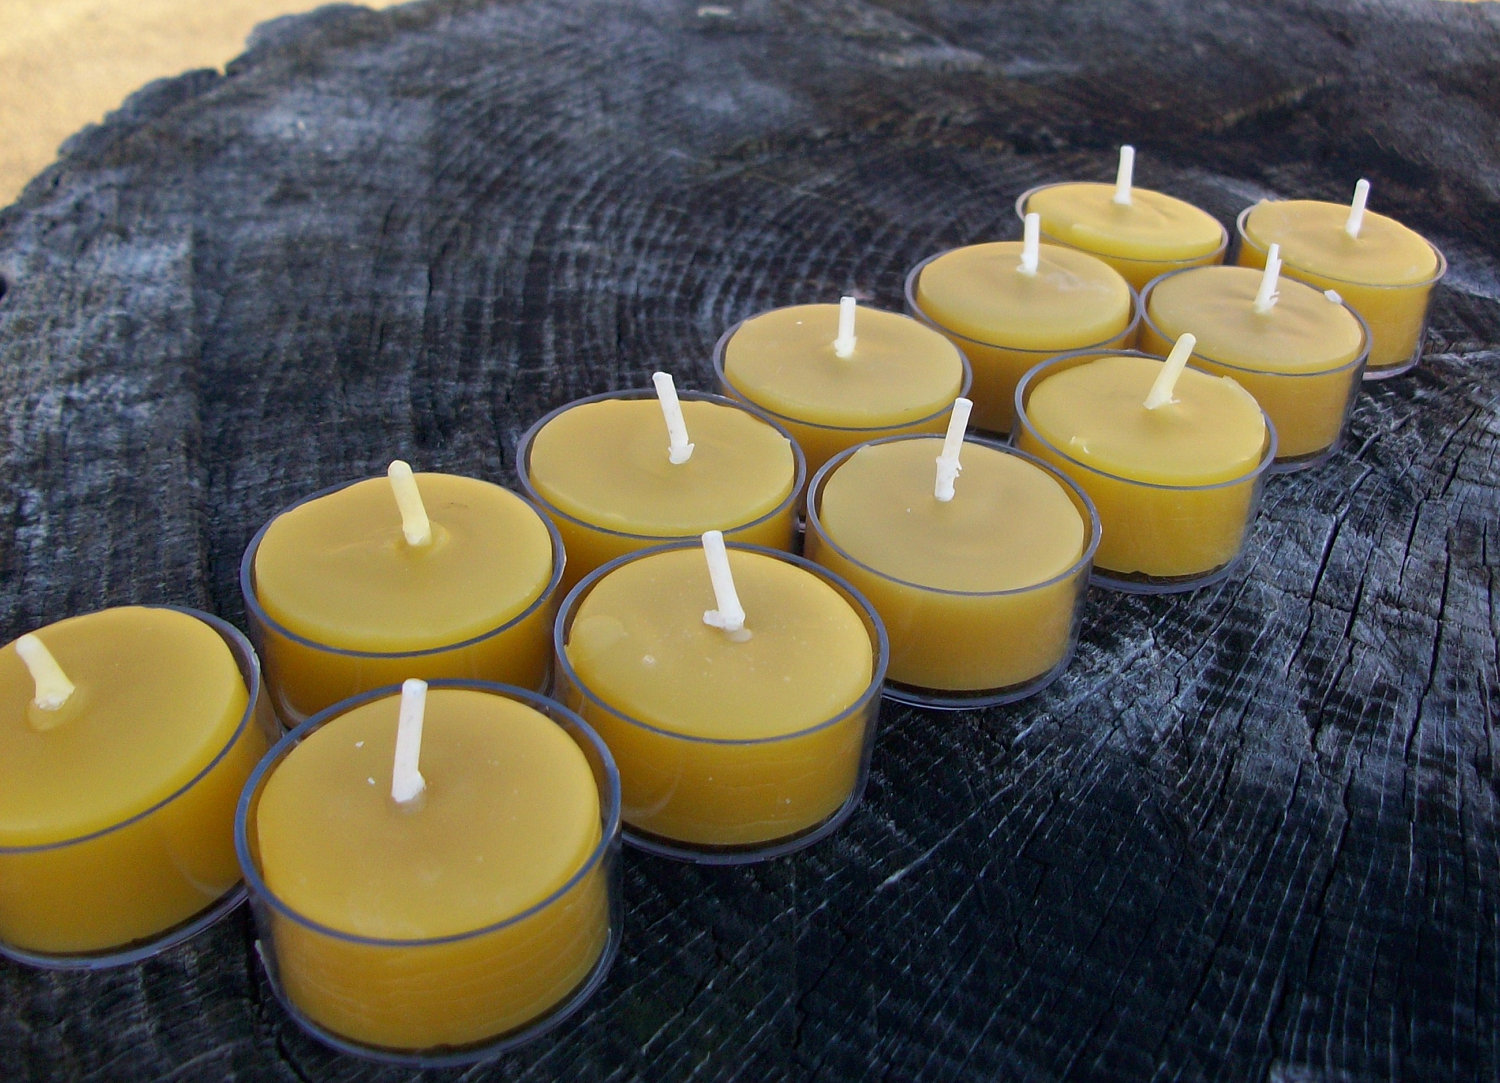 Handmade in Maryland Natural Wedding Clean Burning Bulk Beeswax Tea Light Candles 100% Pure Party Bees wax Tealight Favor